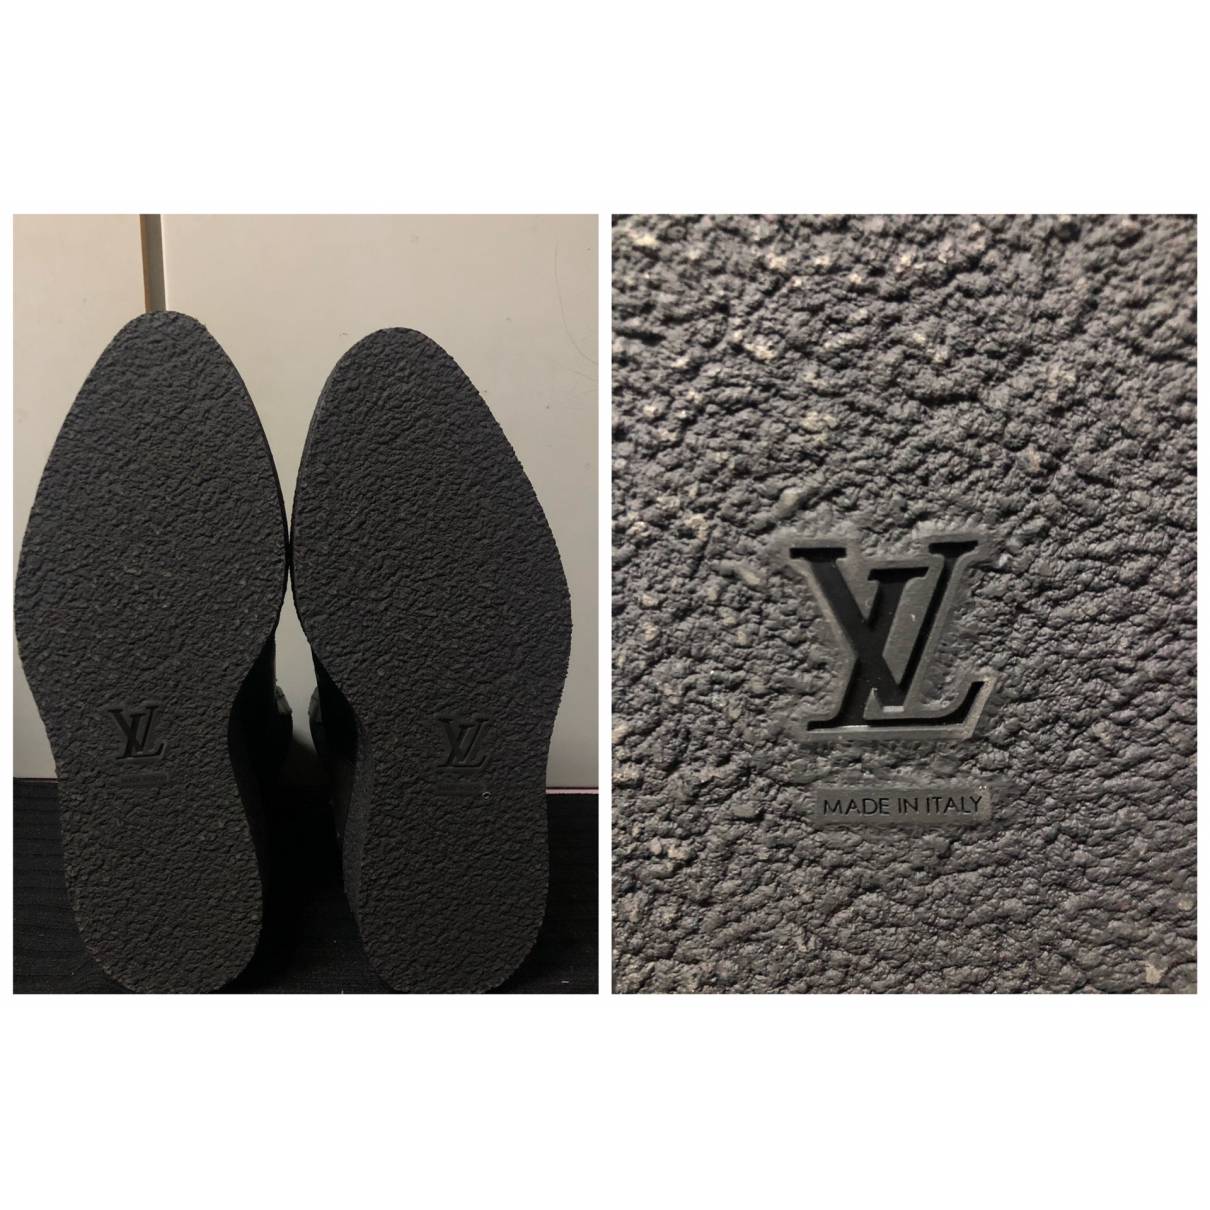 Lv creeper boots Louis Vuitton Black size 9.5 US in Suede - 21048652